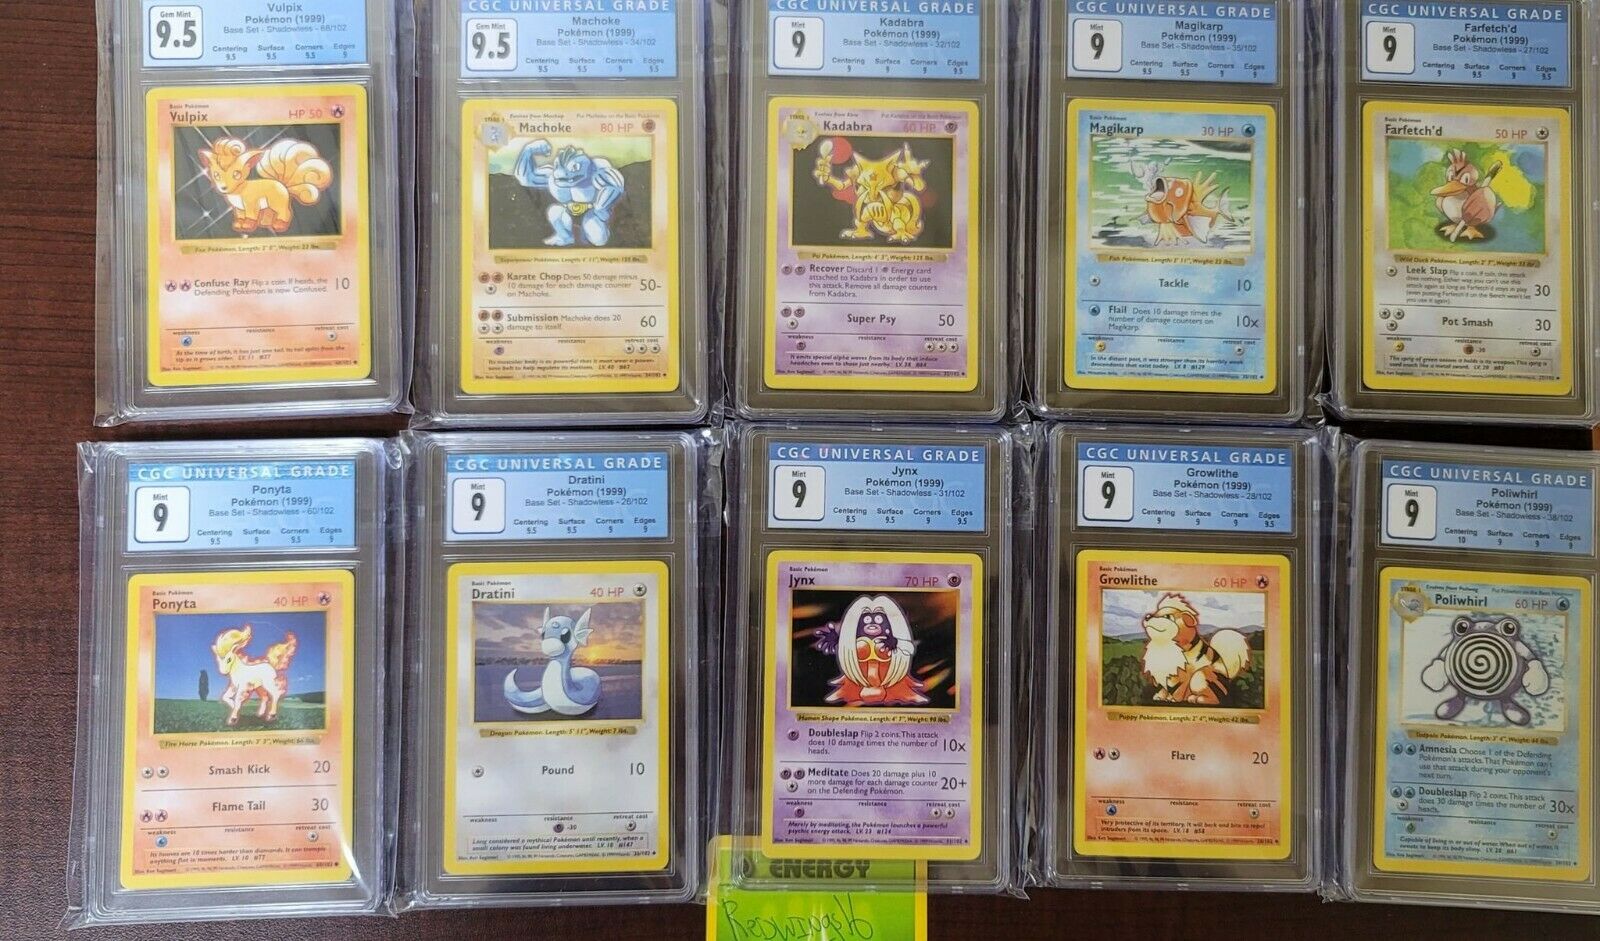 1999 Pokemon Shadowless Cards Lot of 10 different cards CGC graded 9 Hot